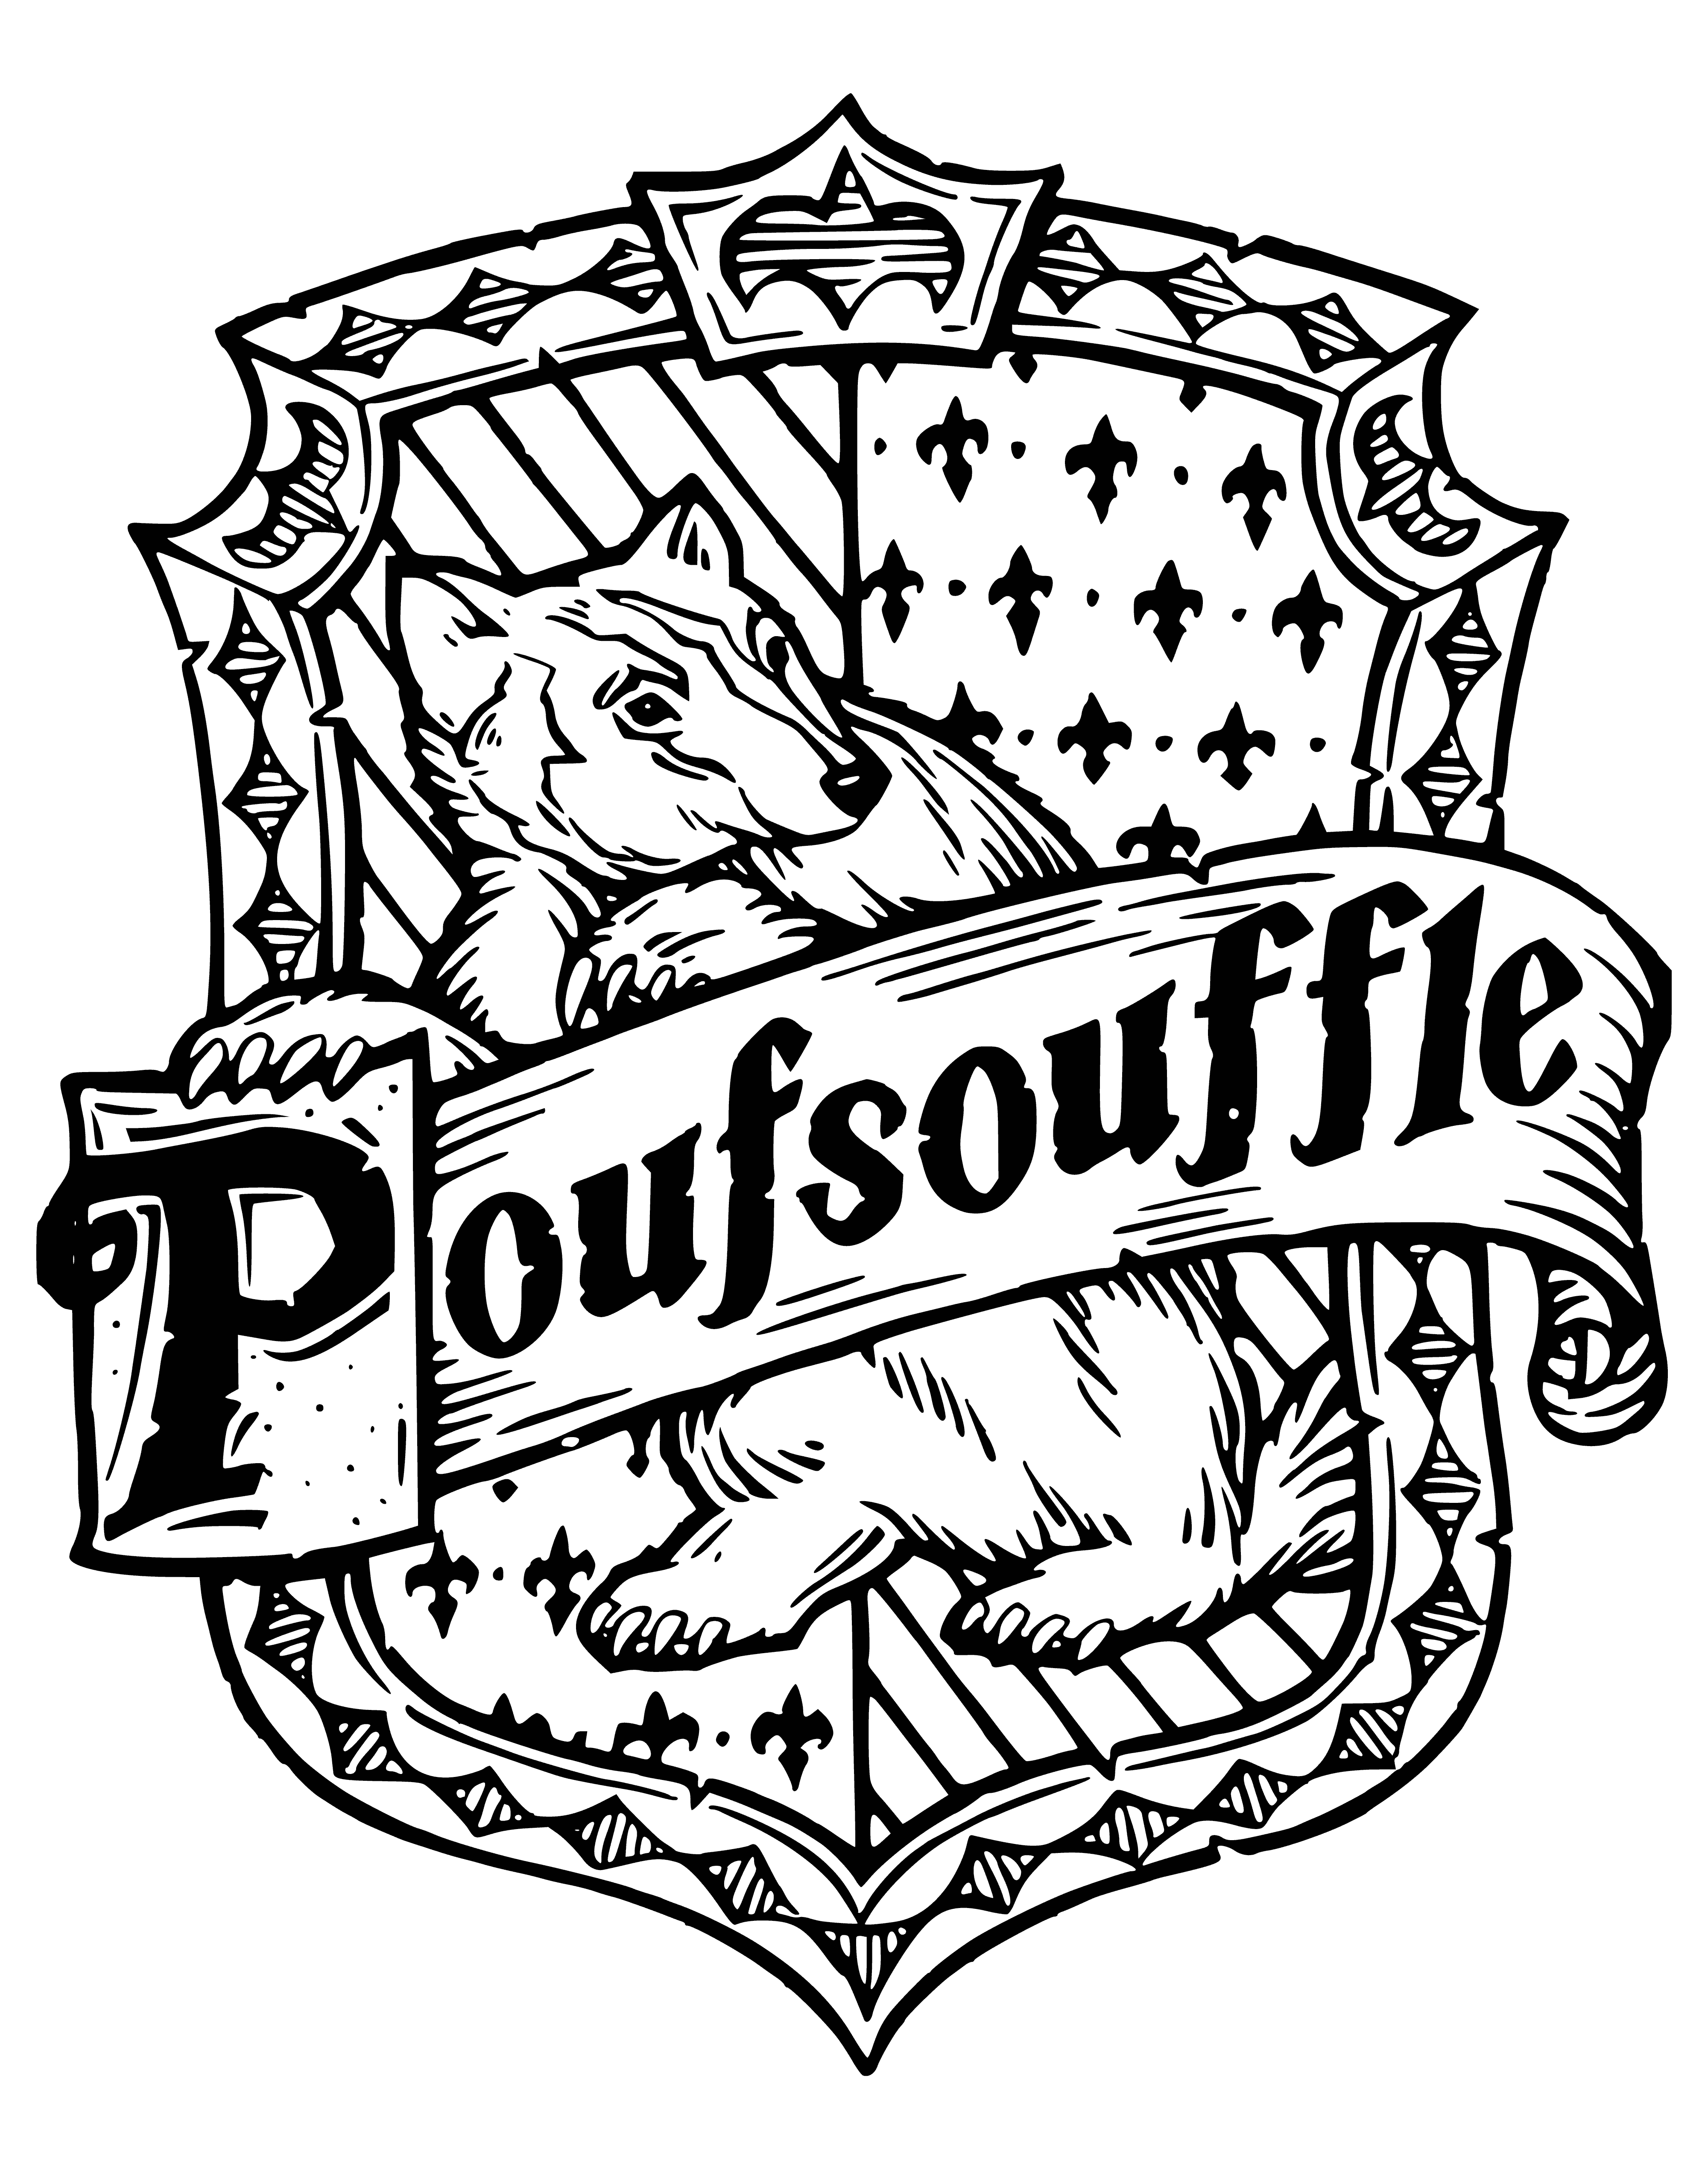 Coat of arms of the Hufflepuff faculty coloring page